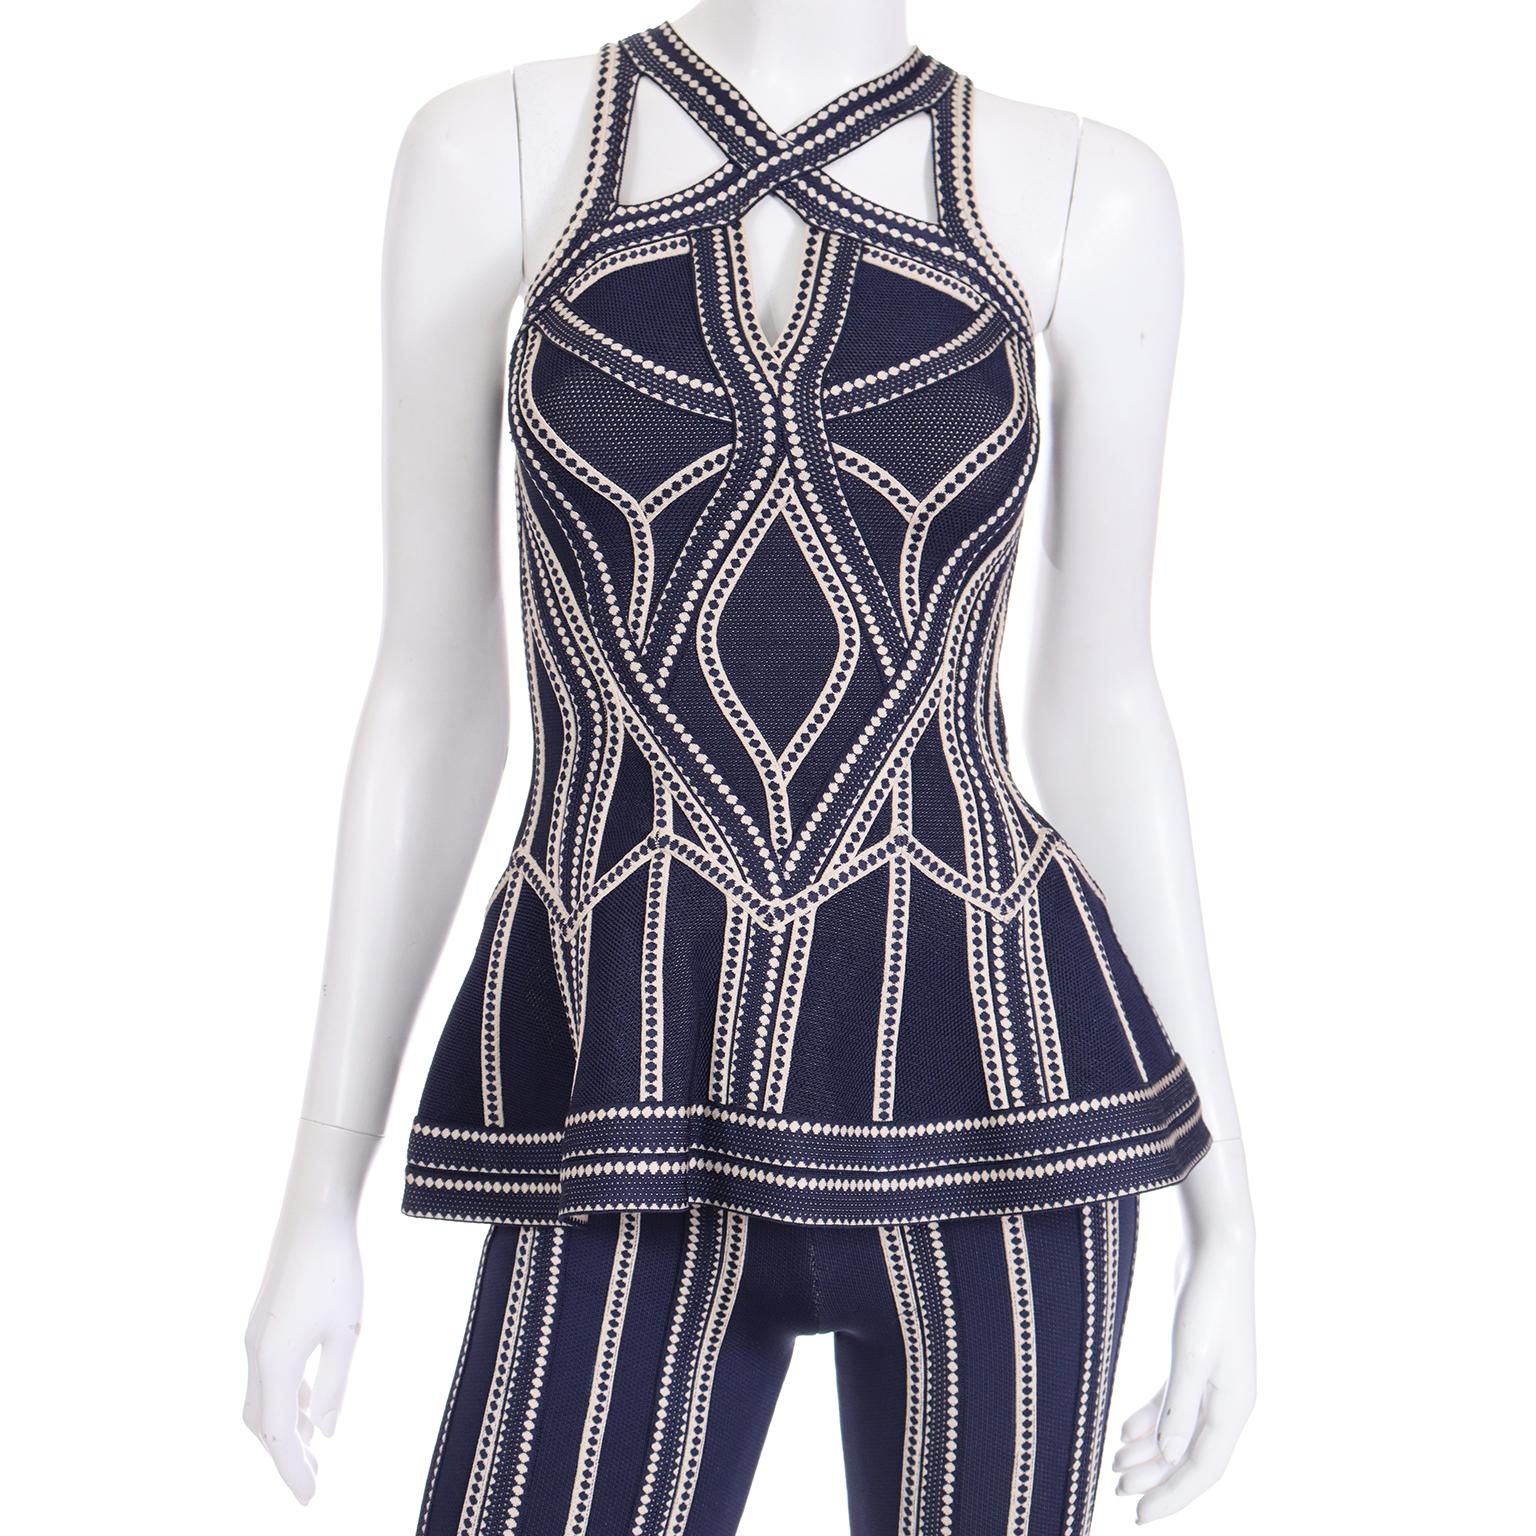 2016 Herve Leger Vintage Blue and White Flared Pants & Cutout Top Runway Outfit For Sale 1